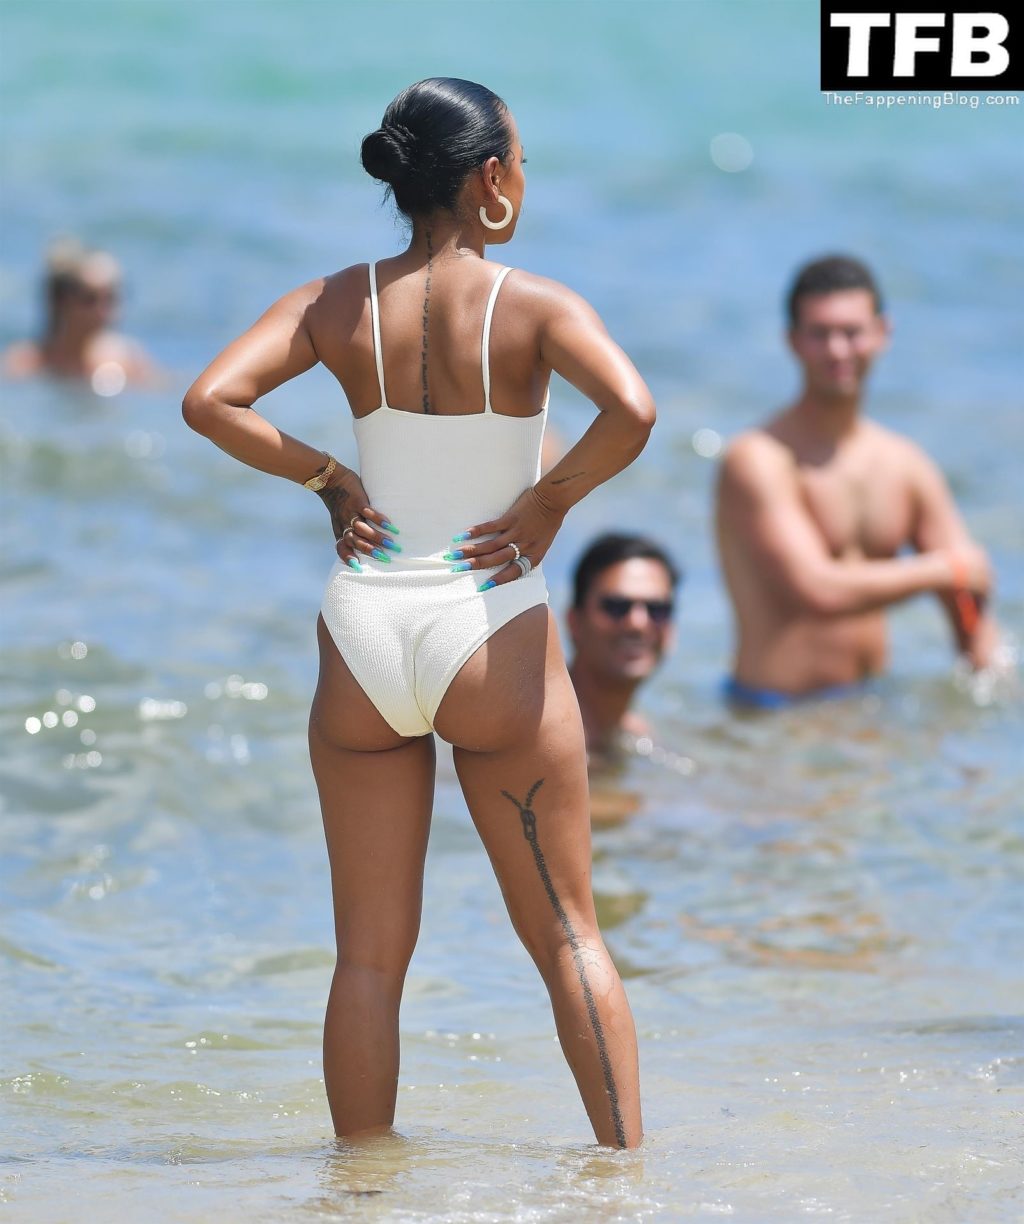 Karrueche Tran Looks Incredible in a White Swimsuit on the Beach in Miami (44 Photos)